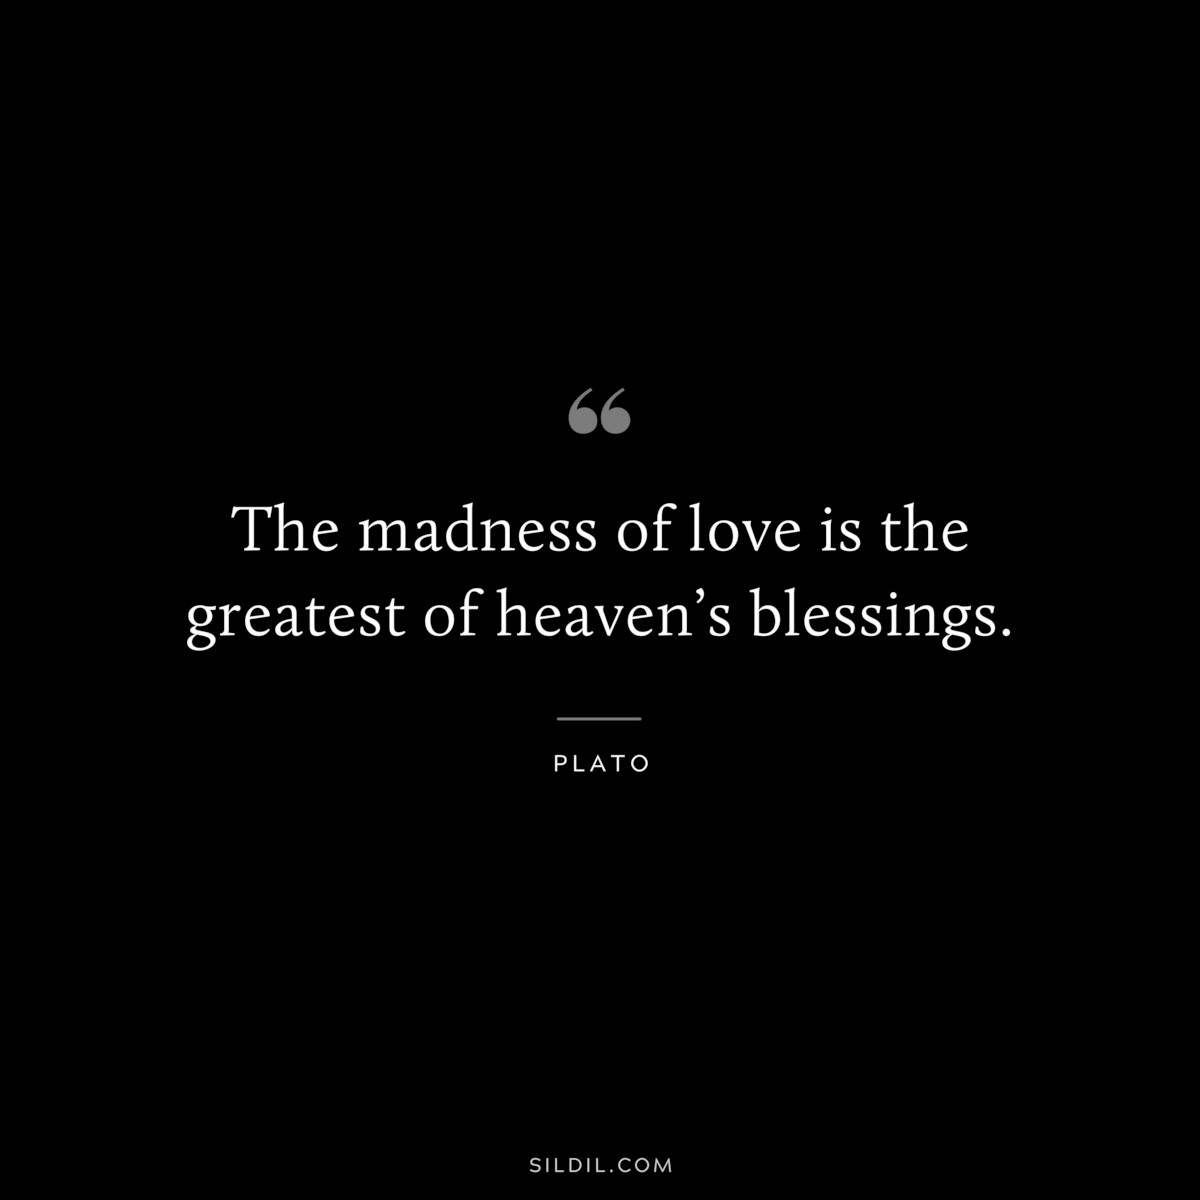 The madness of love is the greatest of heaven’s blessings. ― Plato